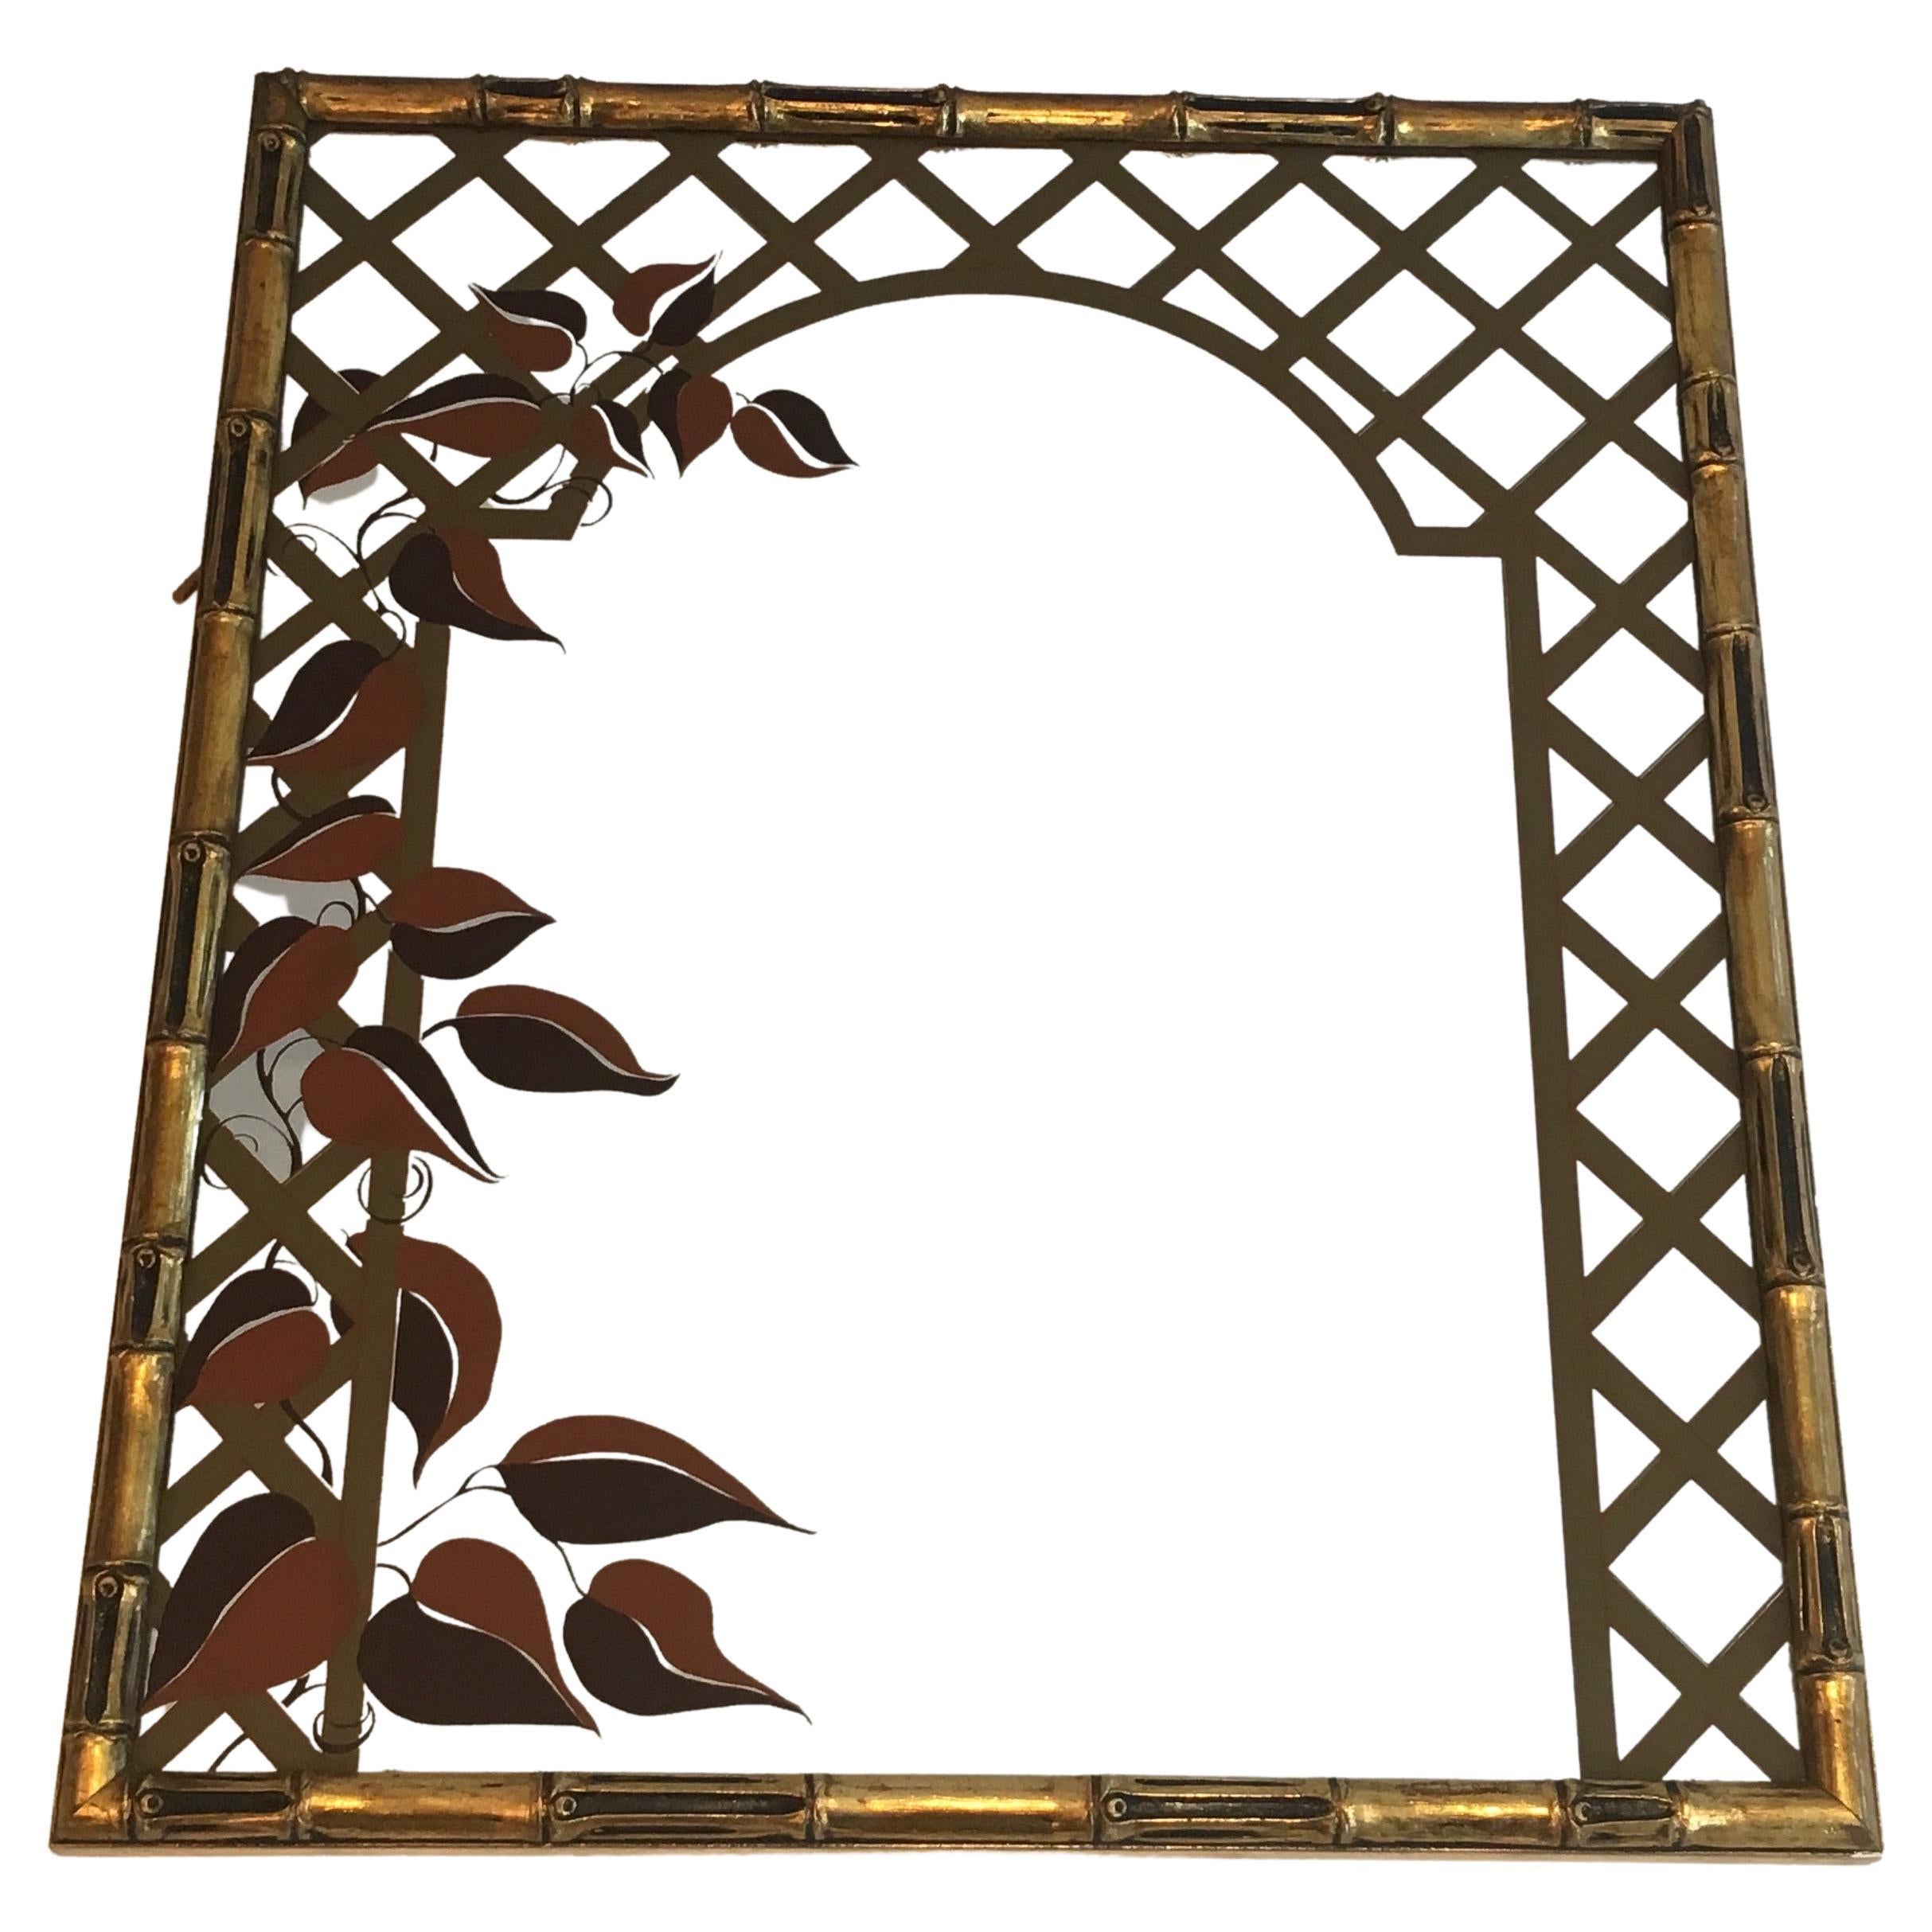 This decorative faux-bamboo mirror is made of gilt wood with printed floral decor. This is a French work/ Circa 1970.